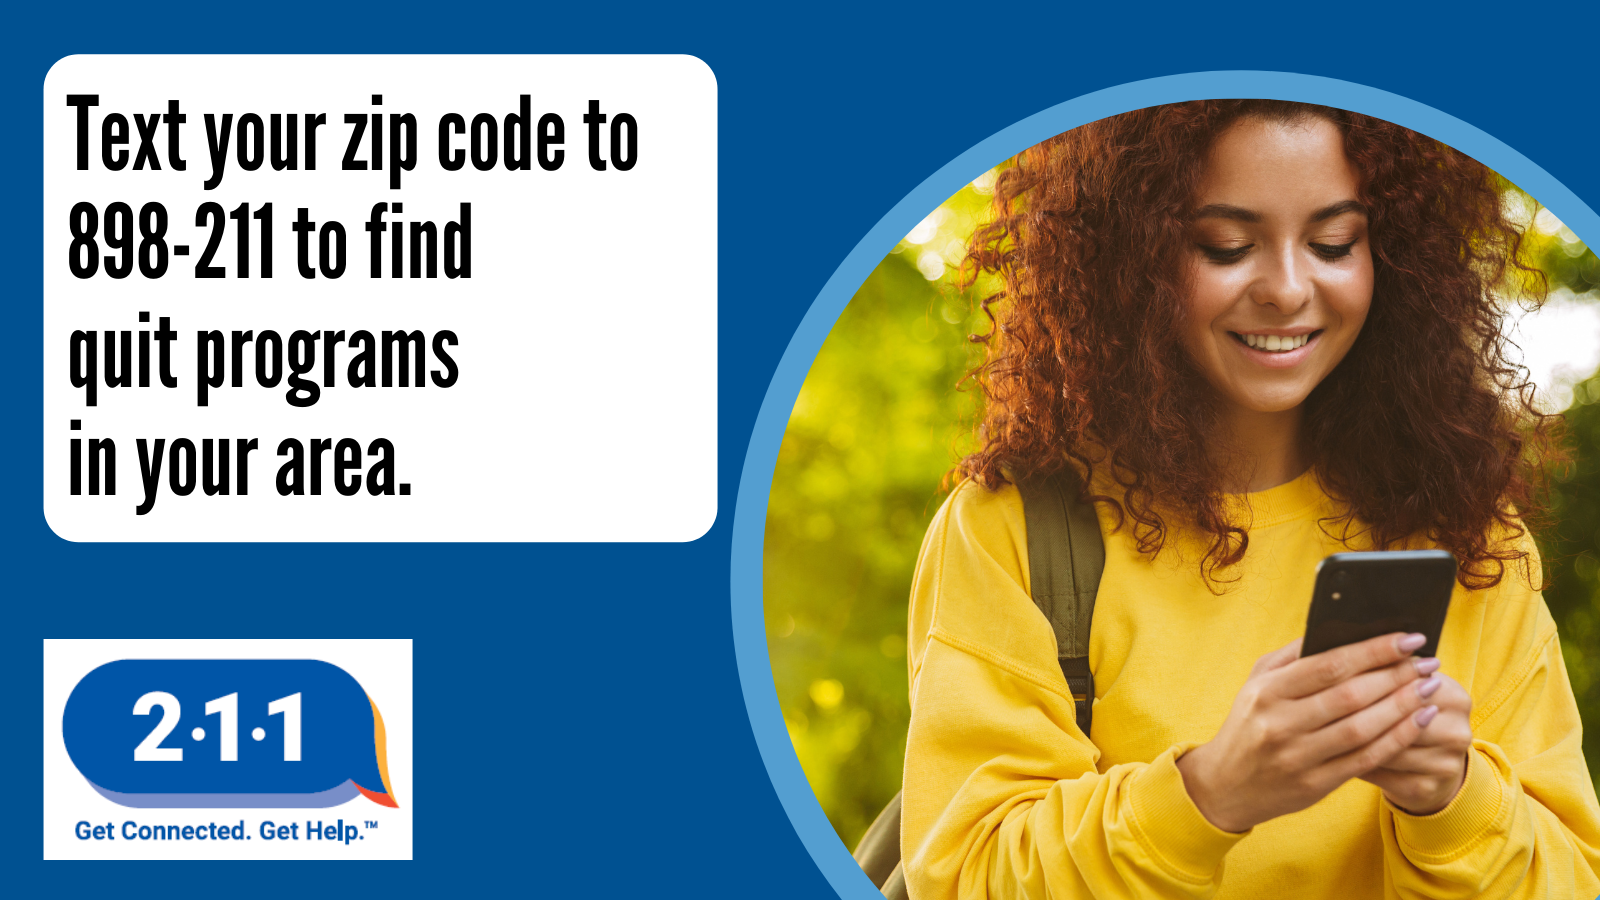 Person texting on phone and text: Text your zip code to 898-211 to find quit programs in your area. 2-1-1